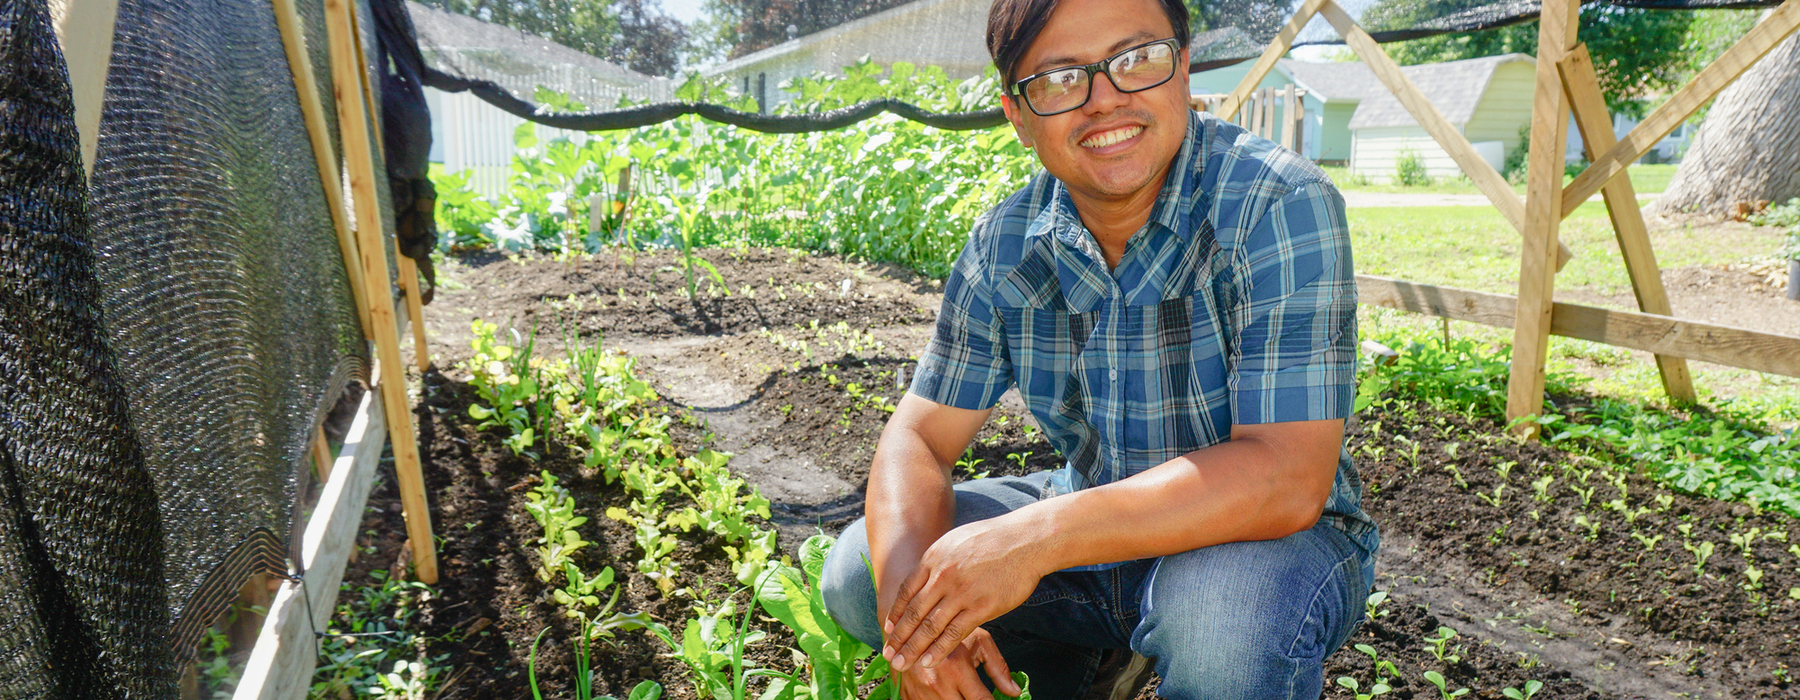 Hispanic male in a blue shirt and jeans squatting in a garden smiling at the camera